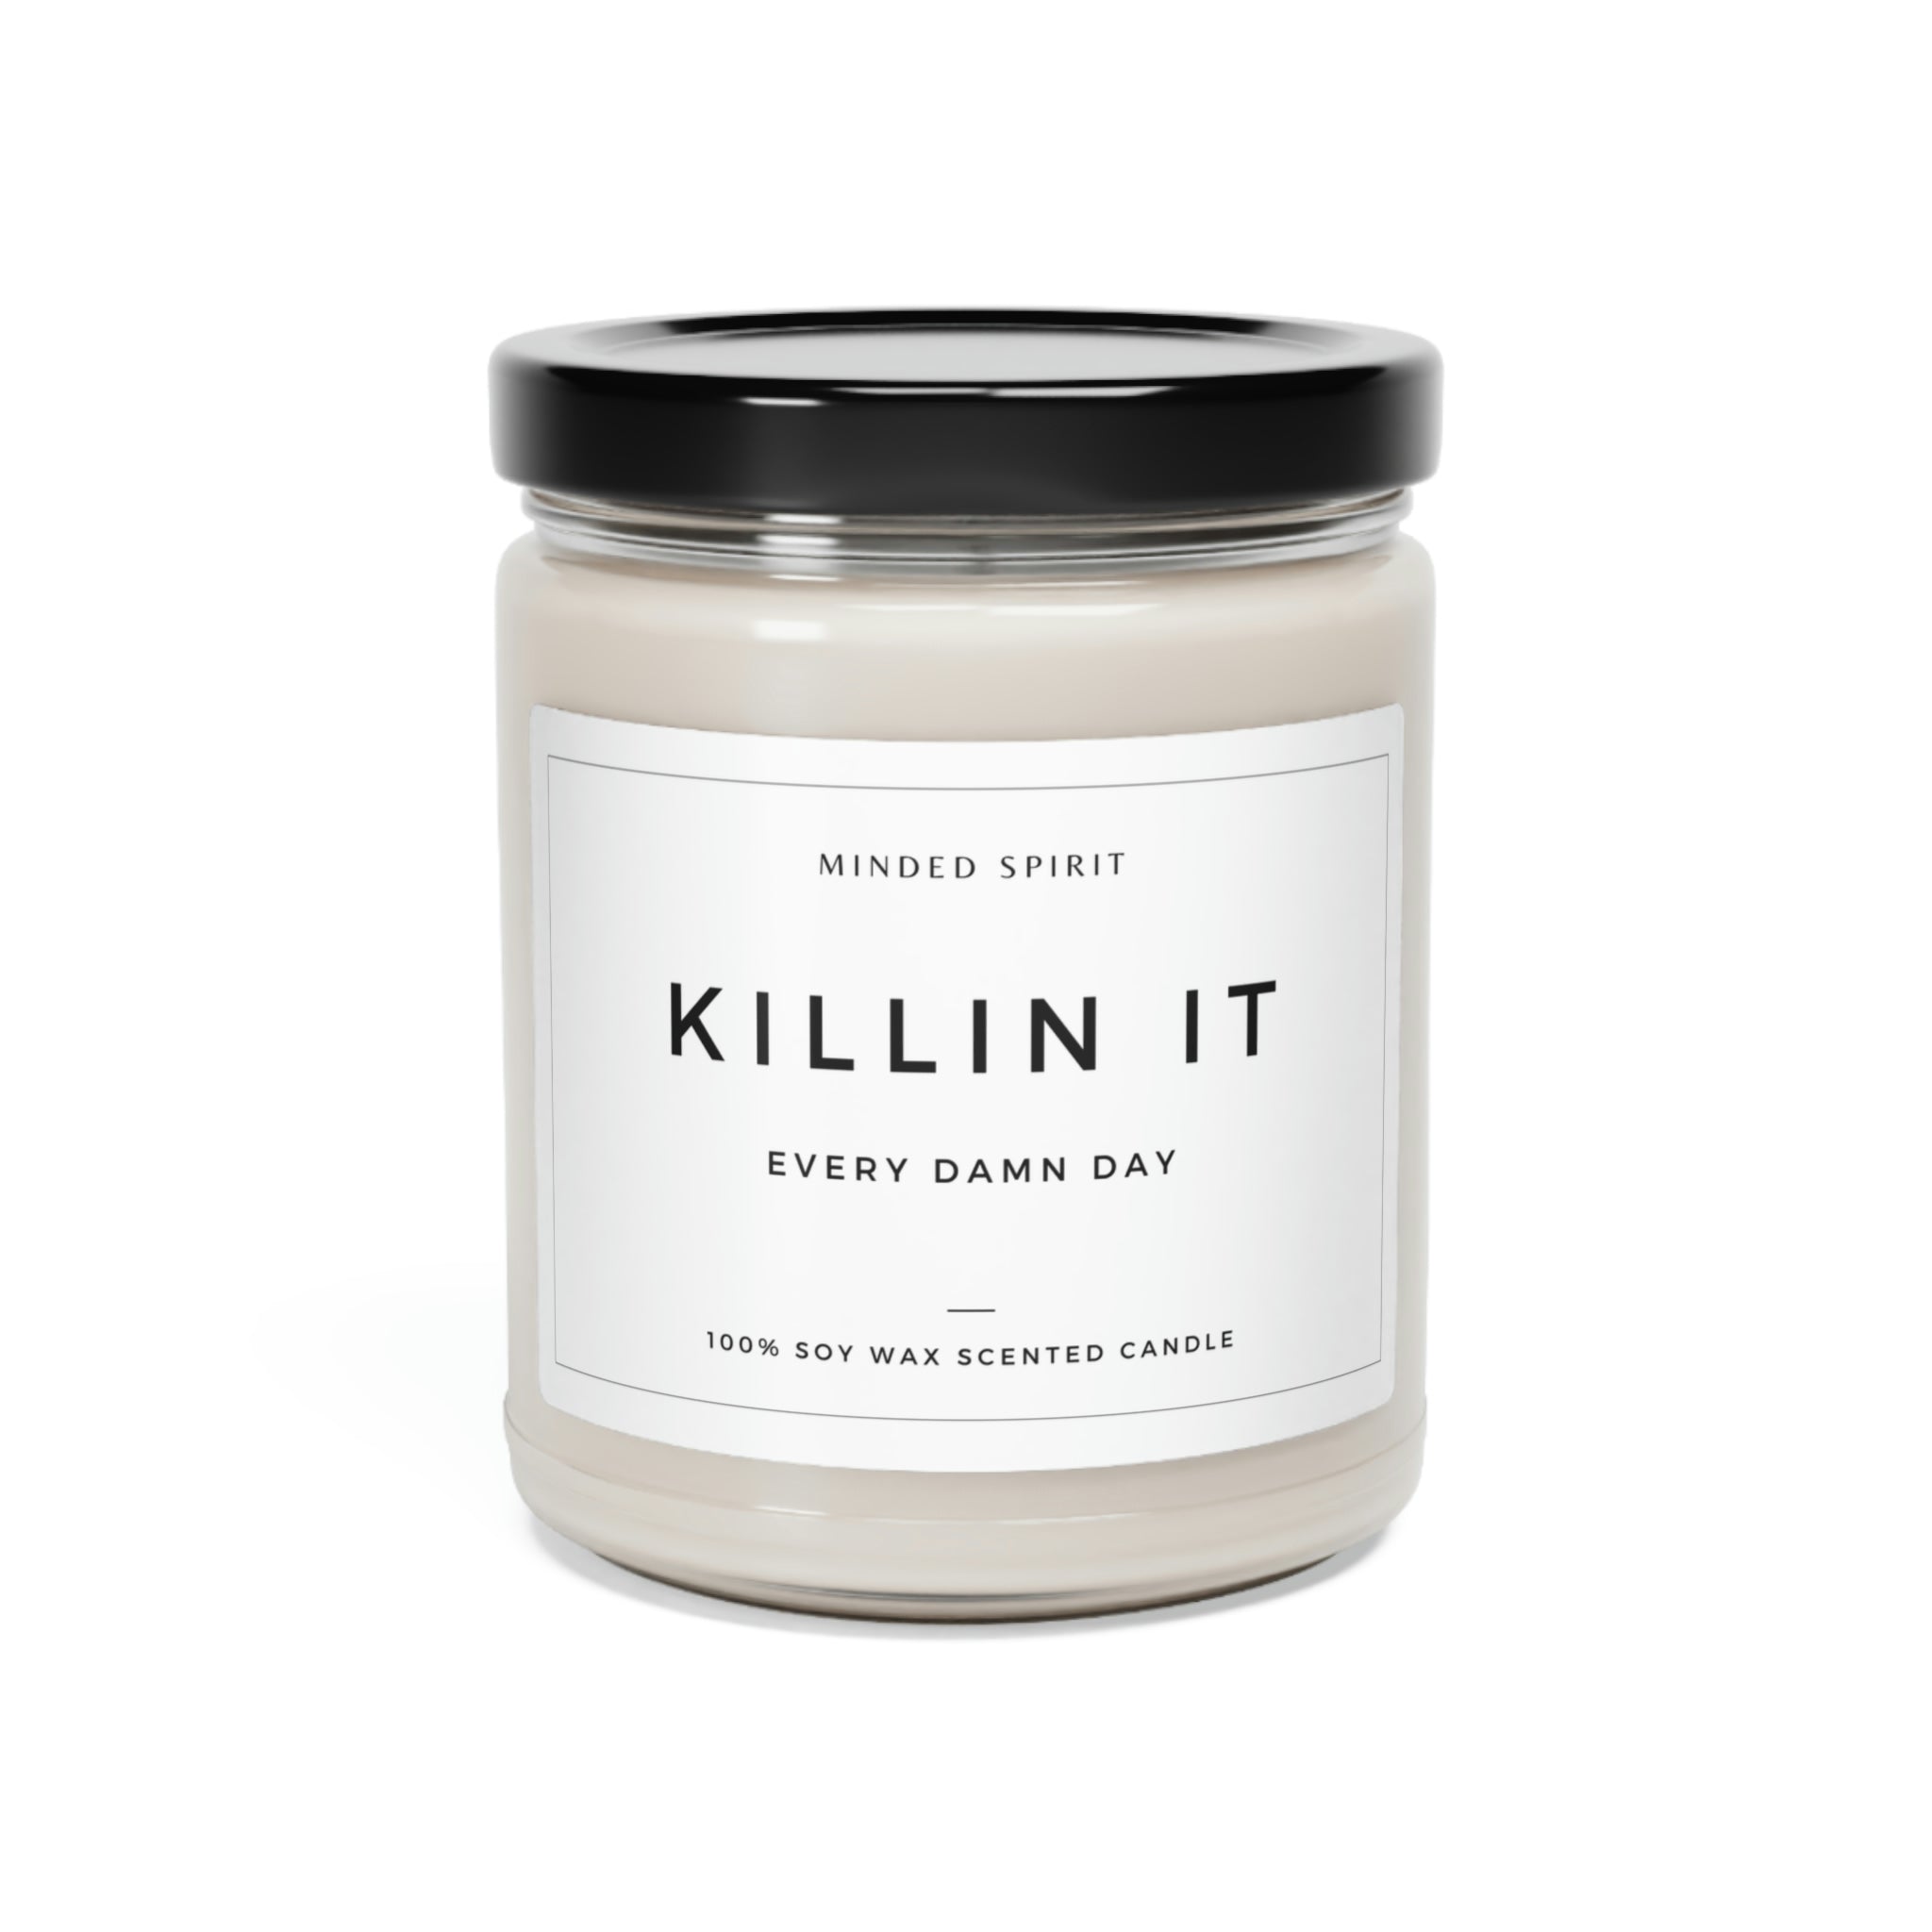 Killin It Sassy Self-Help Scented Candle